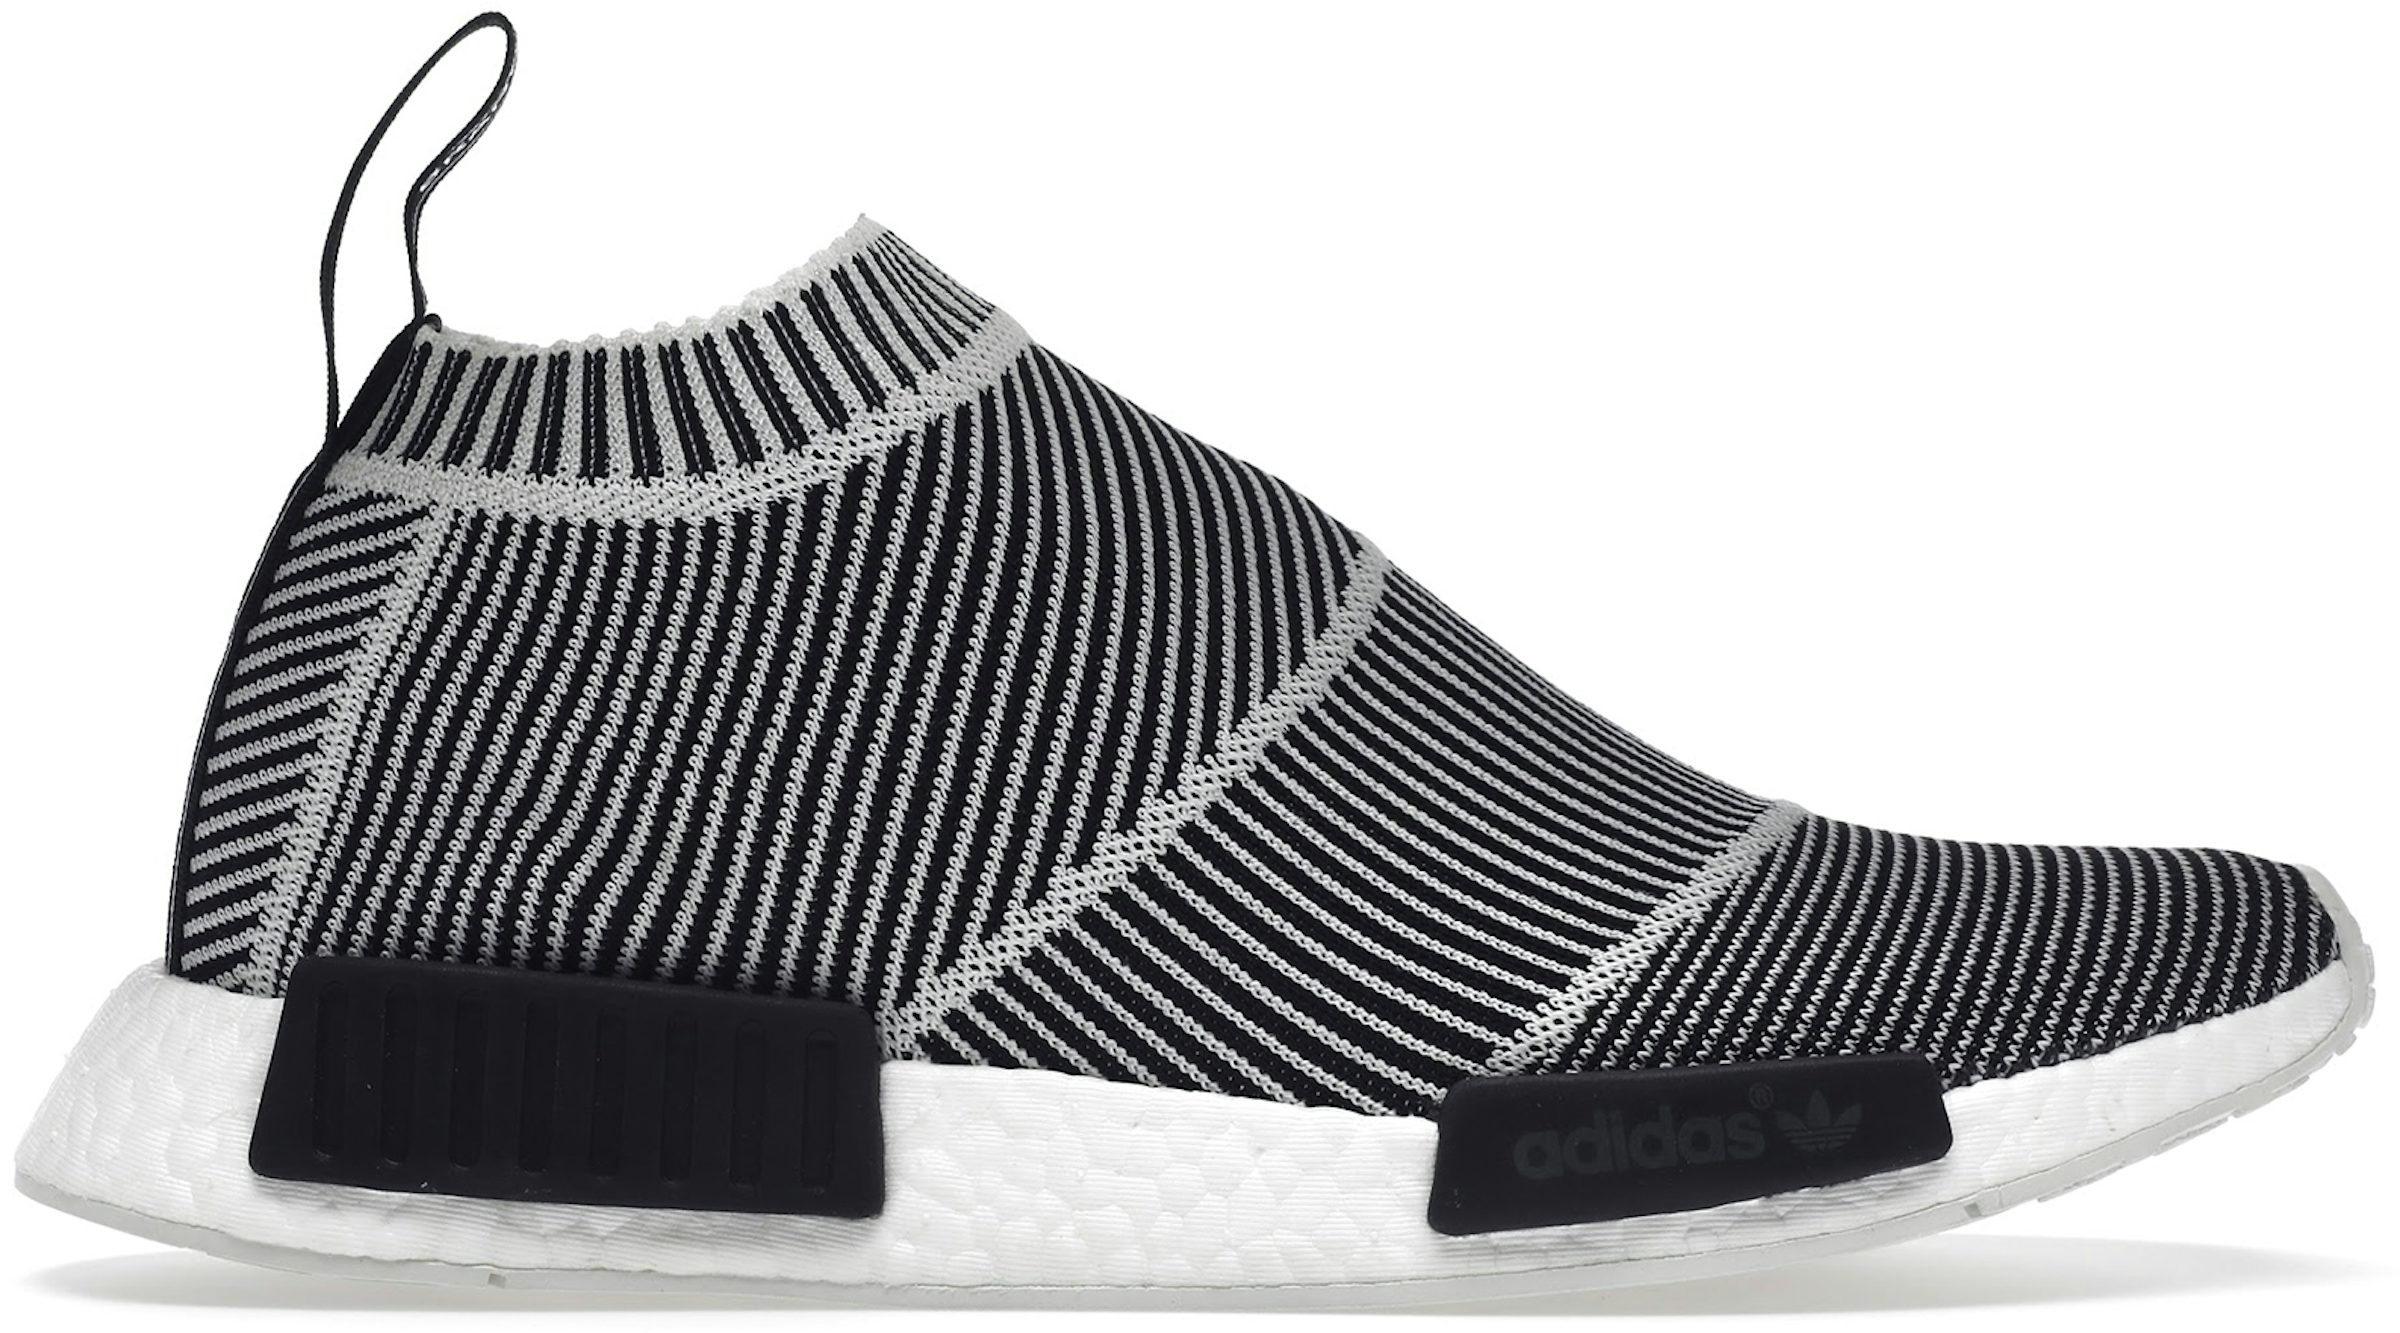 bælte cement Bred vifte adidas NMD - All Sizes & Colorways at StockX